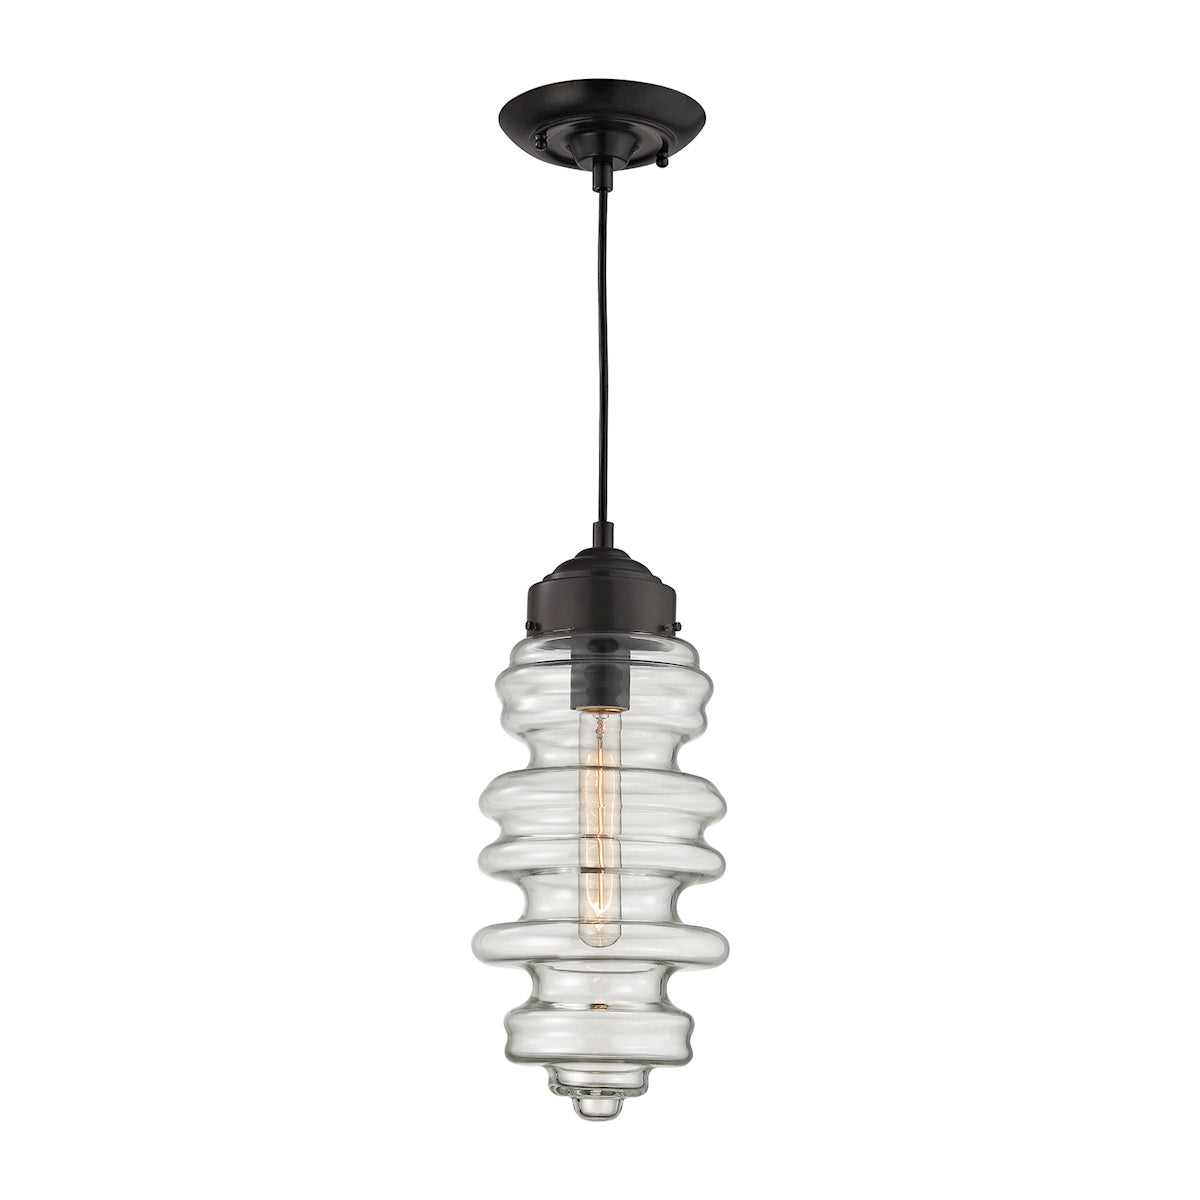 ELK Lighting 17205/1 Cipher 1-Light Mini Pendant in Oil Rubbed Bronze with Clear Glass